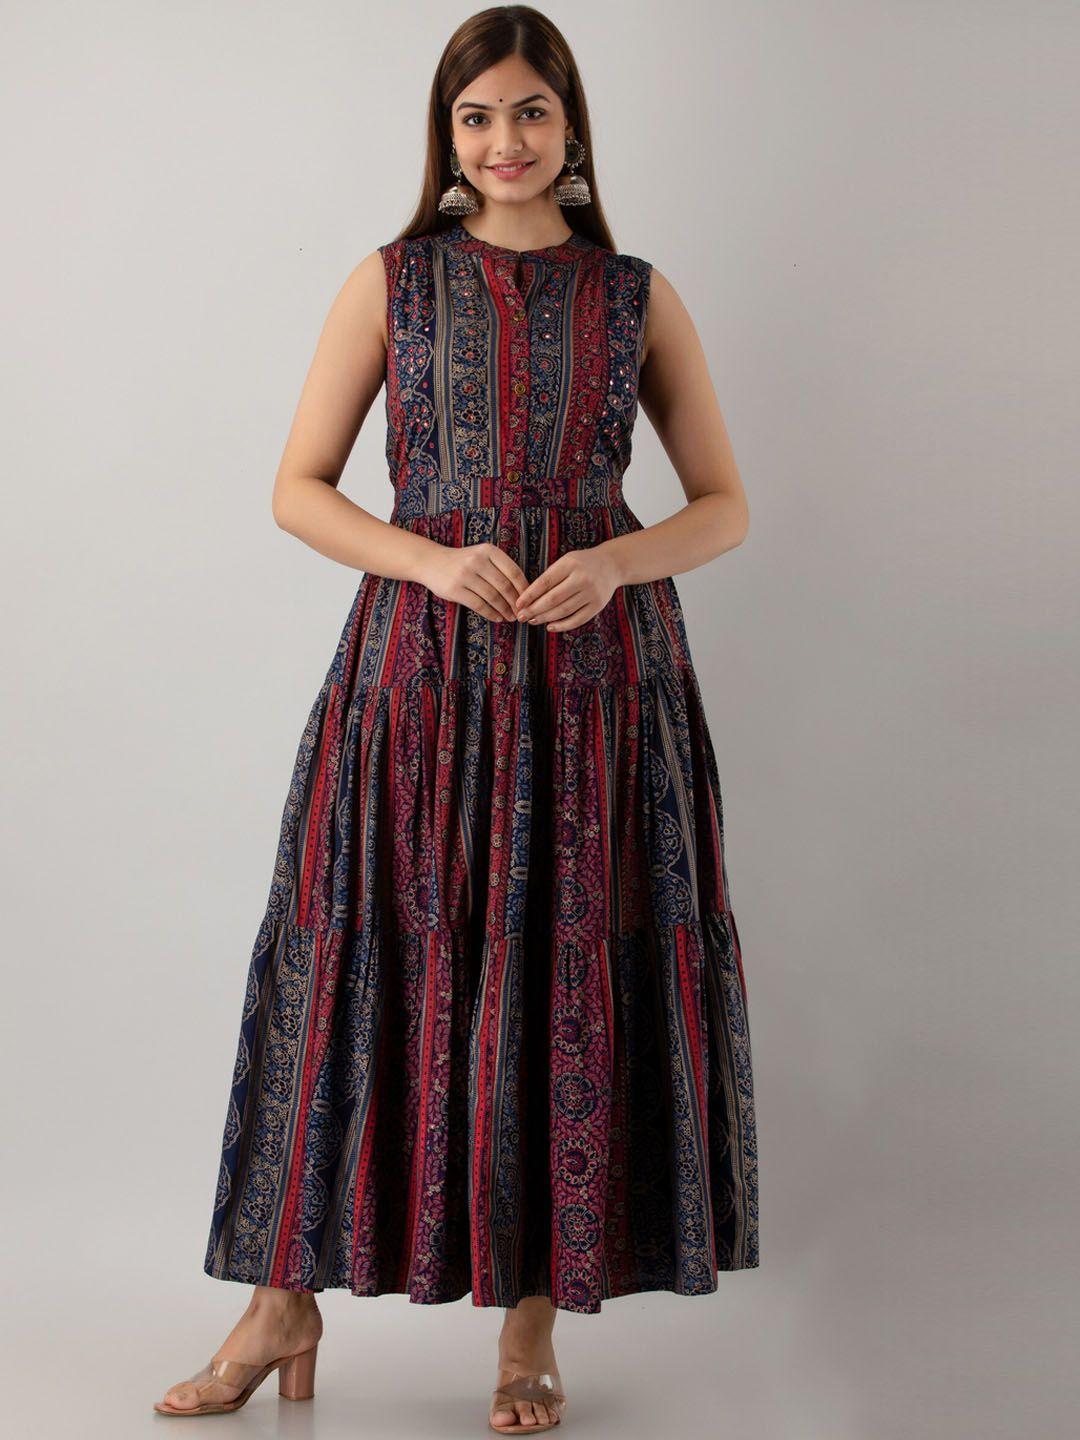 here&now women navy blue printed ethnic dresses